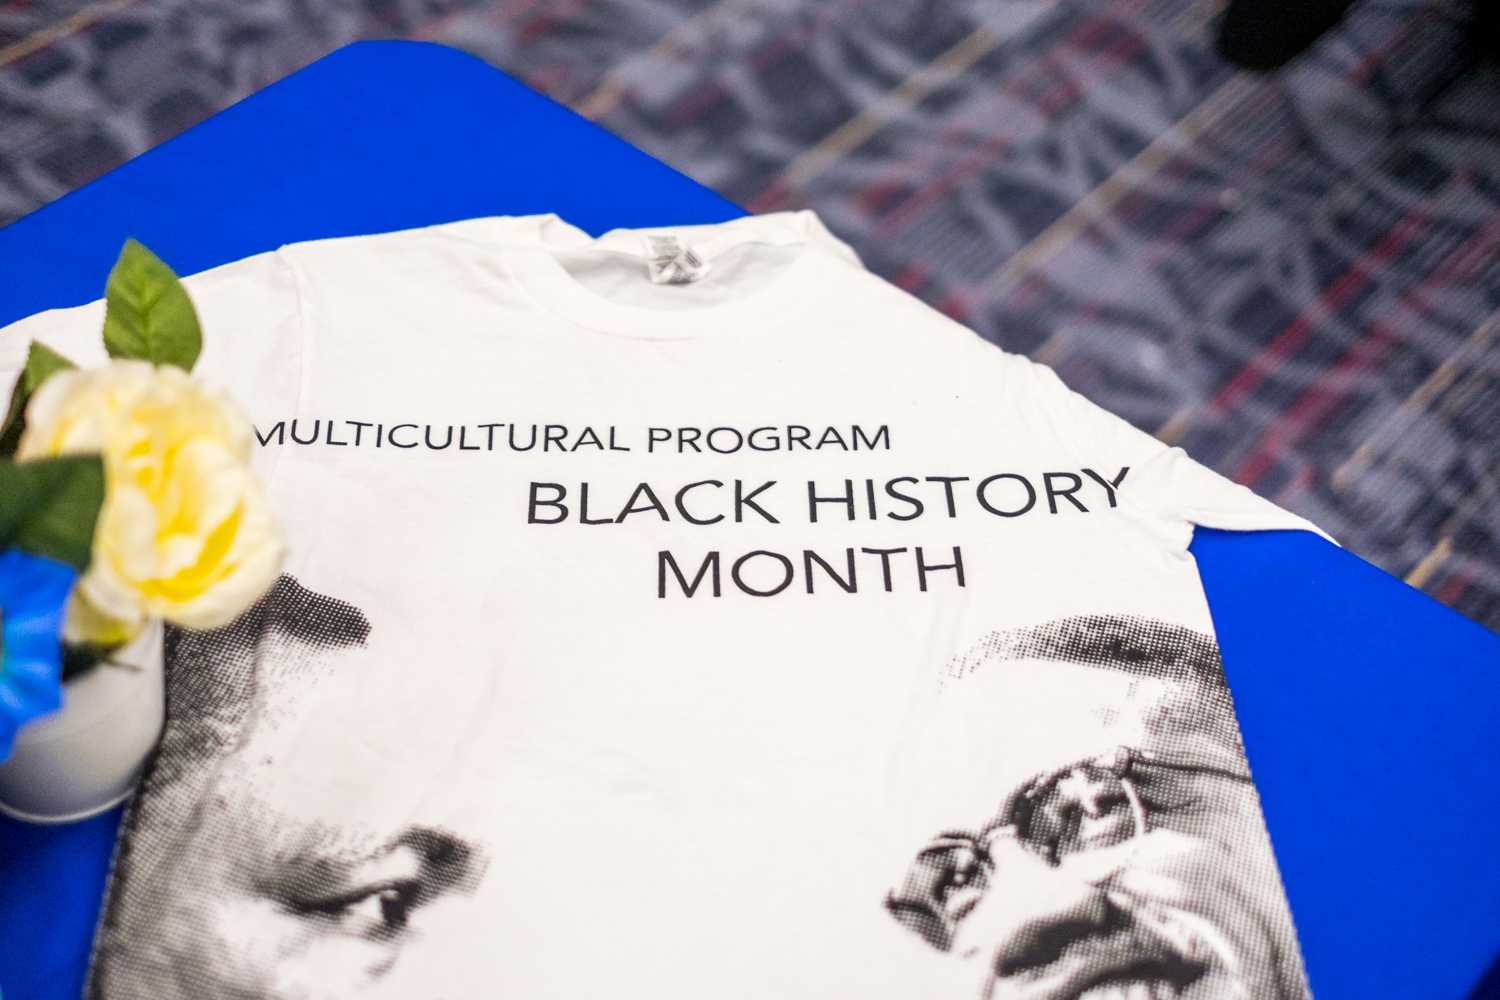 House of Black Culture was an event organized by Multicultural Programming held February 12th.